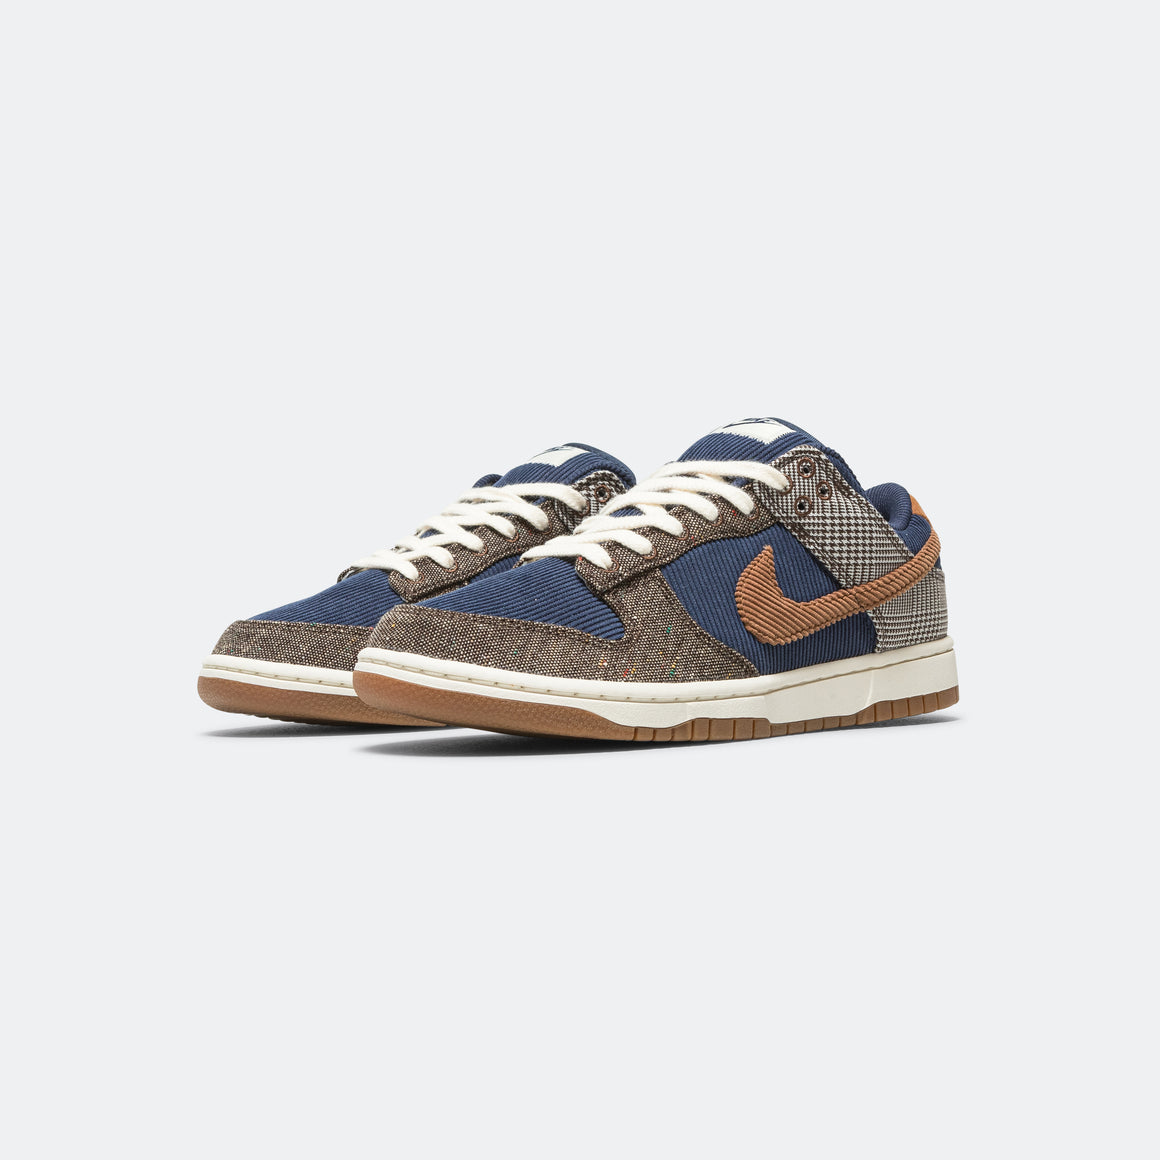 Dunk Low PRM - Midnight Navy/Ale Brown-Pale Ivory